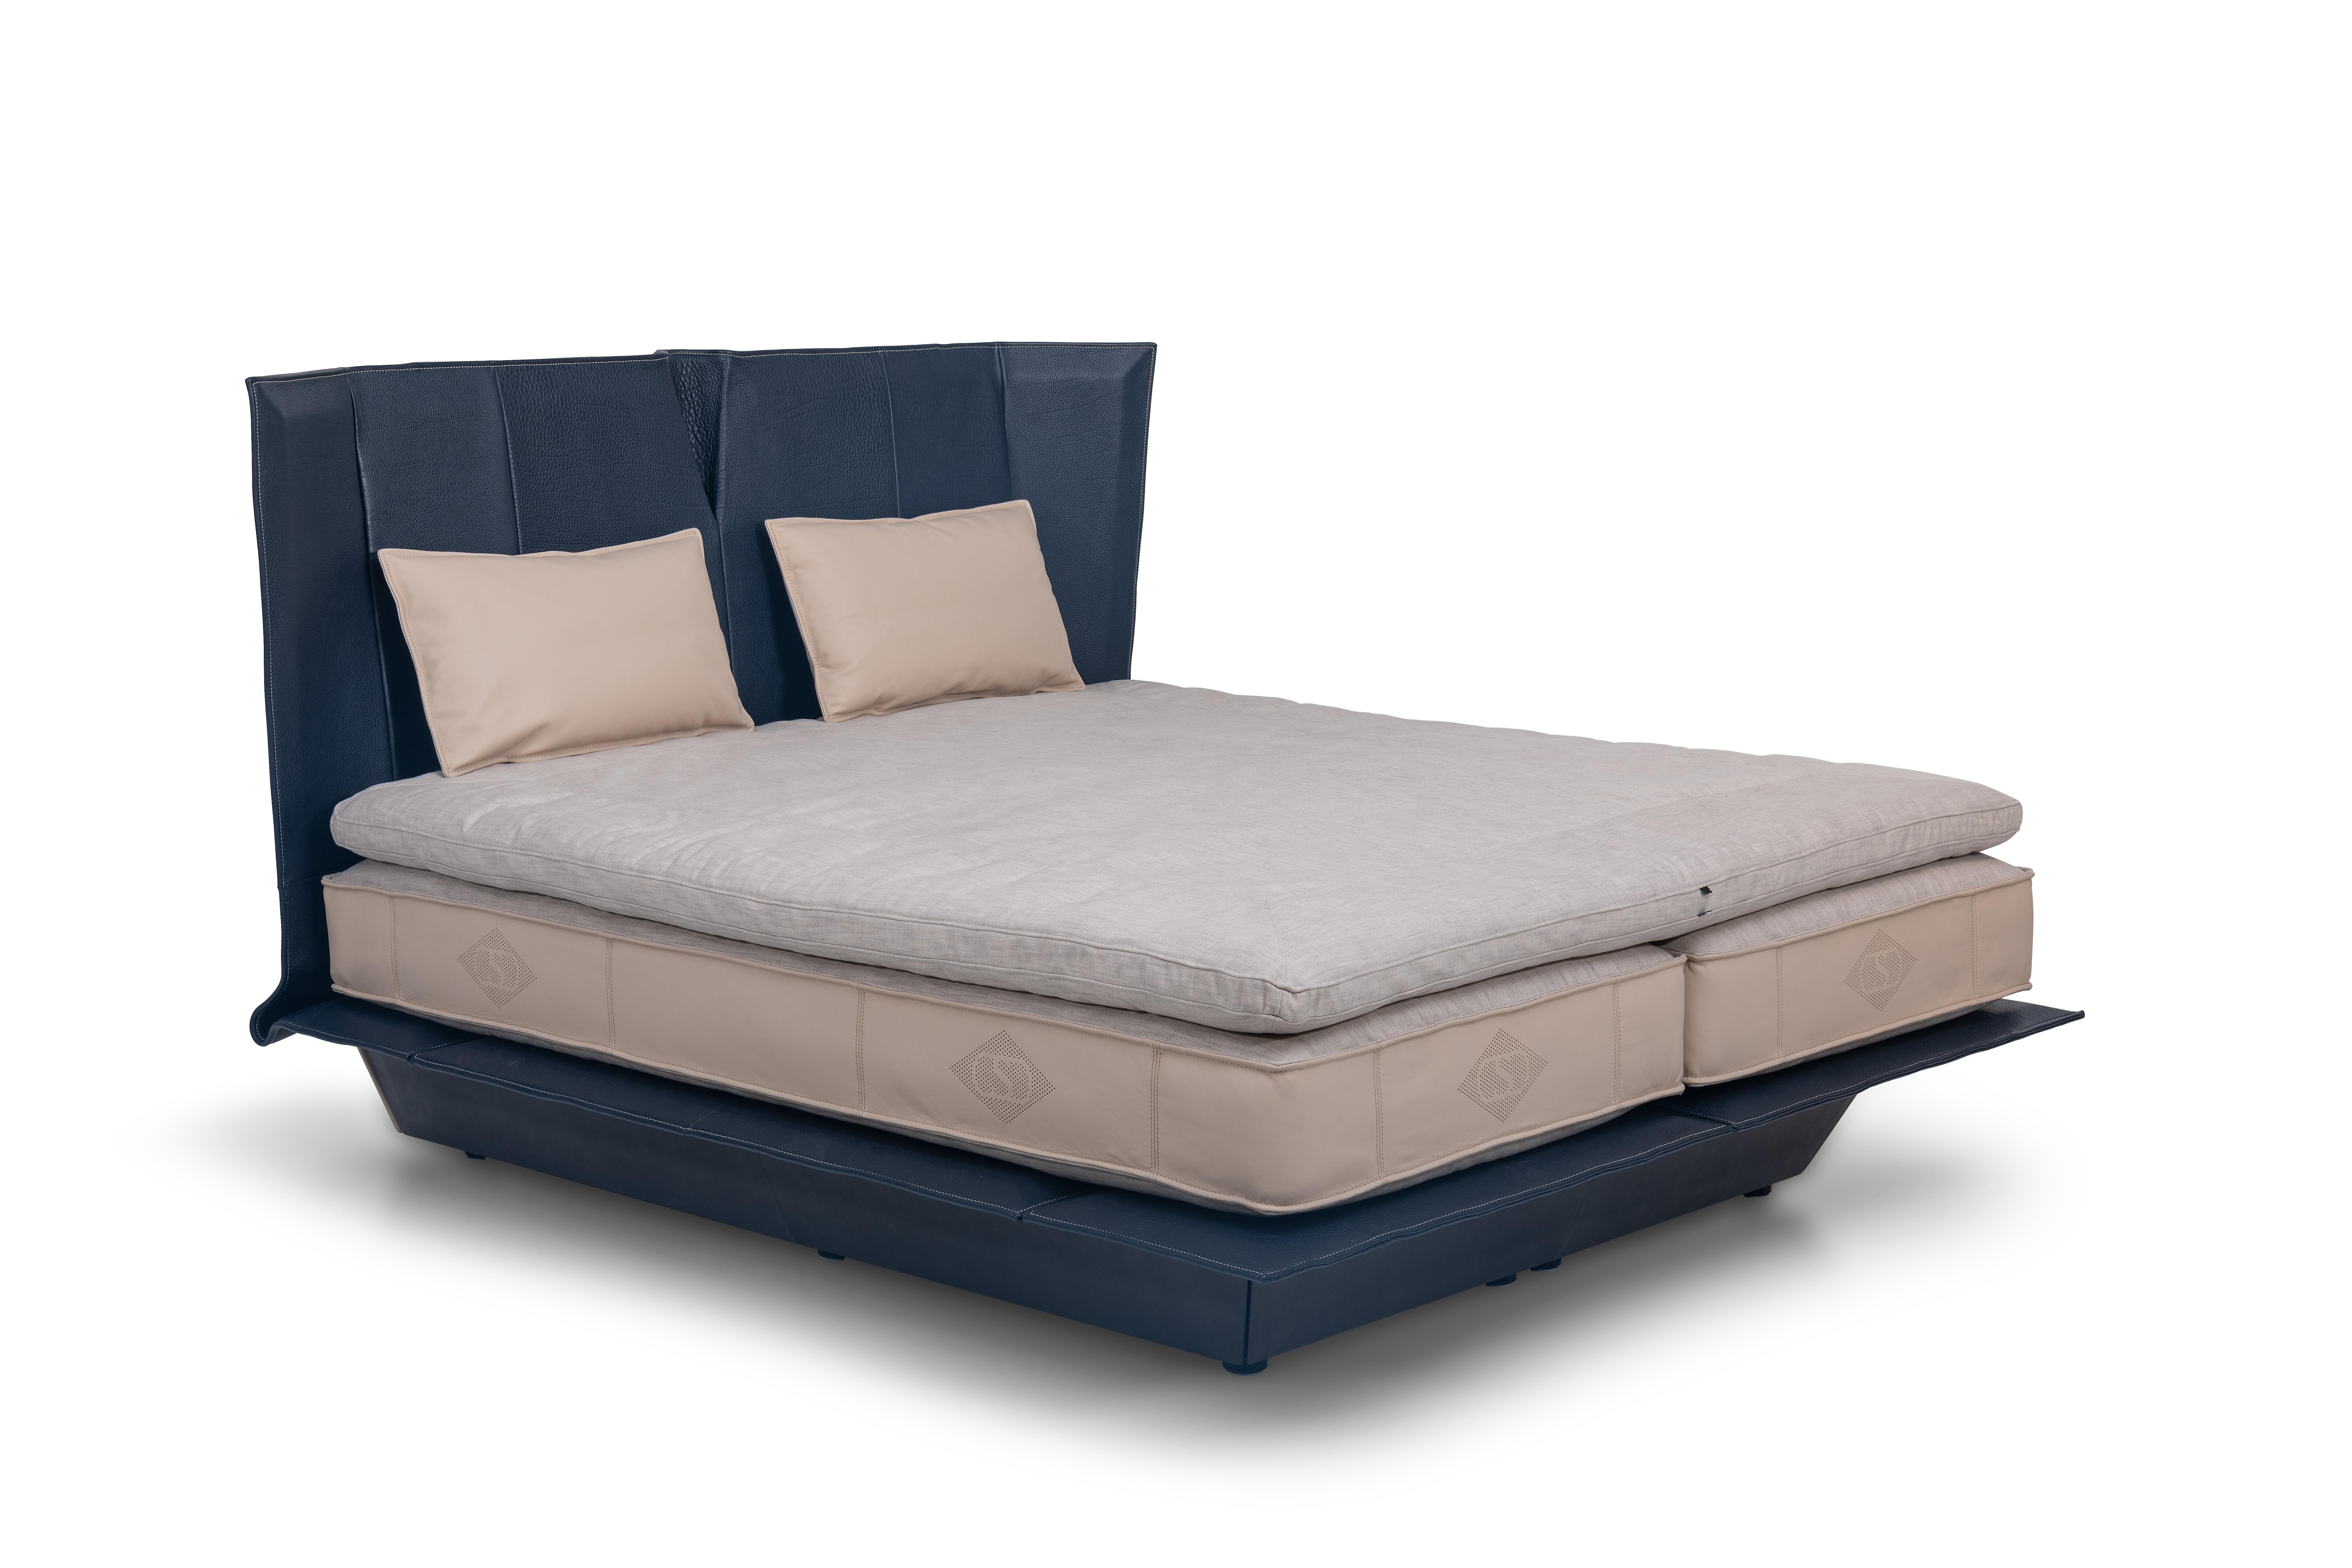 DS-1155 bed by De Sede
Dimensions: D 220 x W 197 x H 29 cm
Materials: Anthracite-colored base frame, frame and bedhead exclusively in NECK leather. With special de Sede spring core.

Prices may change according to the chosen materials and size.